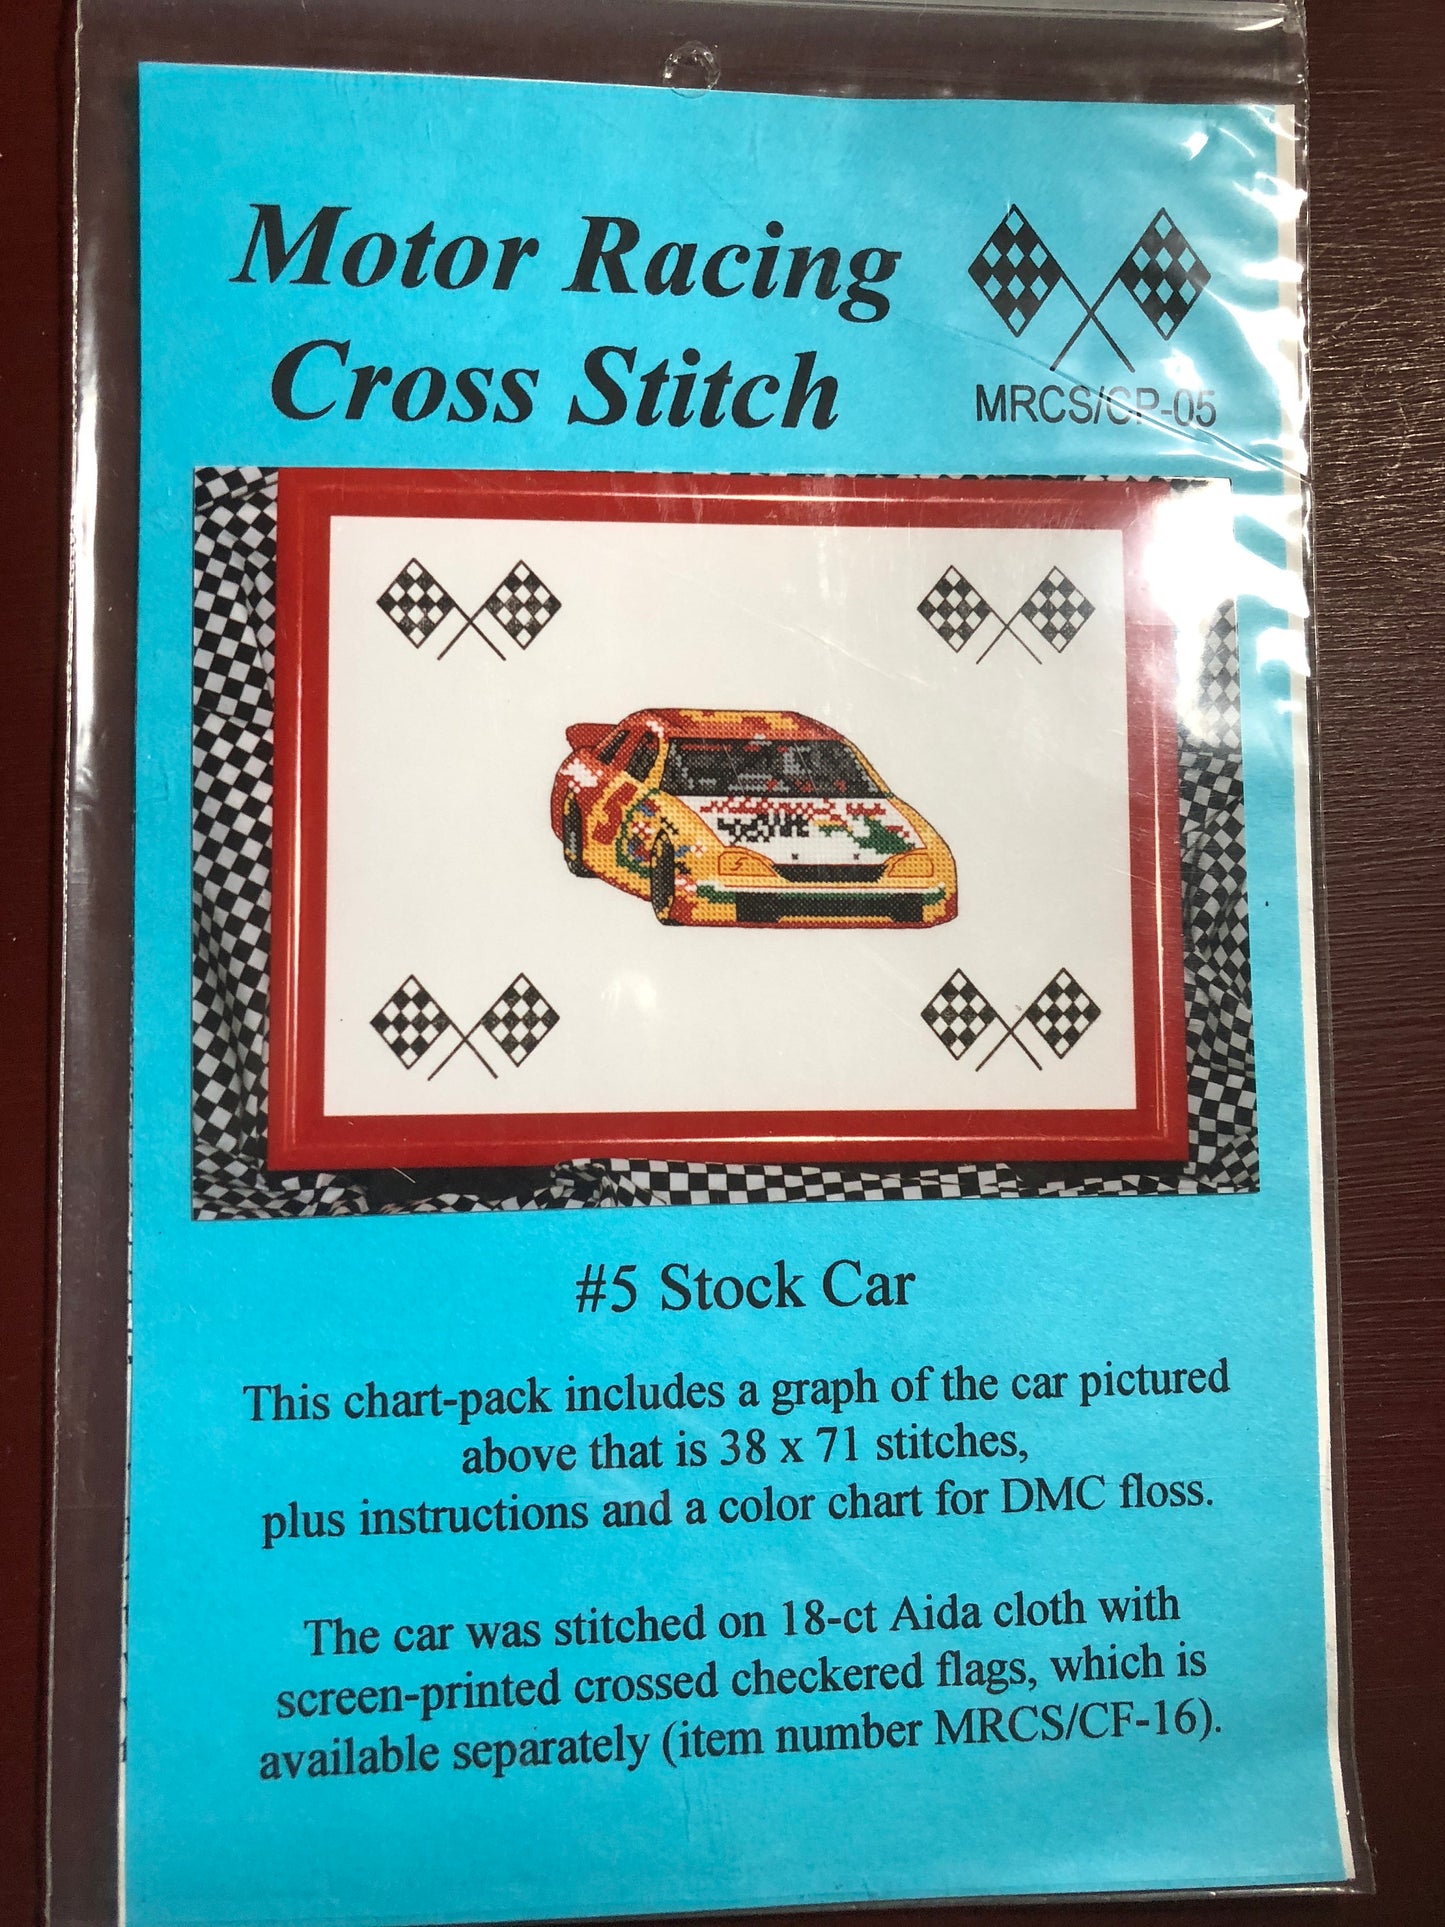 Number 5, Stock Car, Vintage Motor Racing Cross Stitch Chart